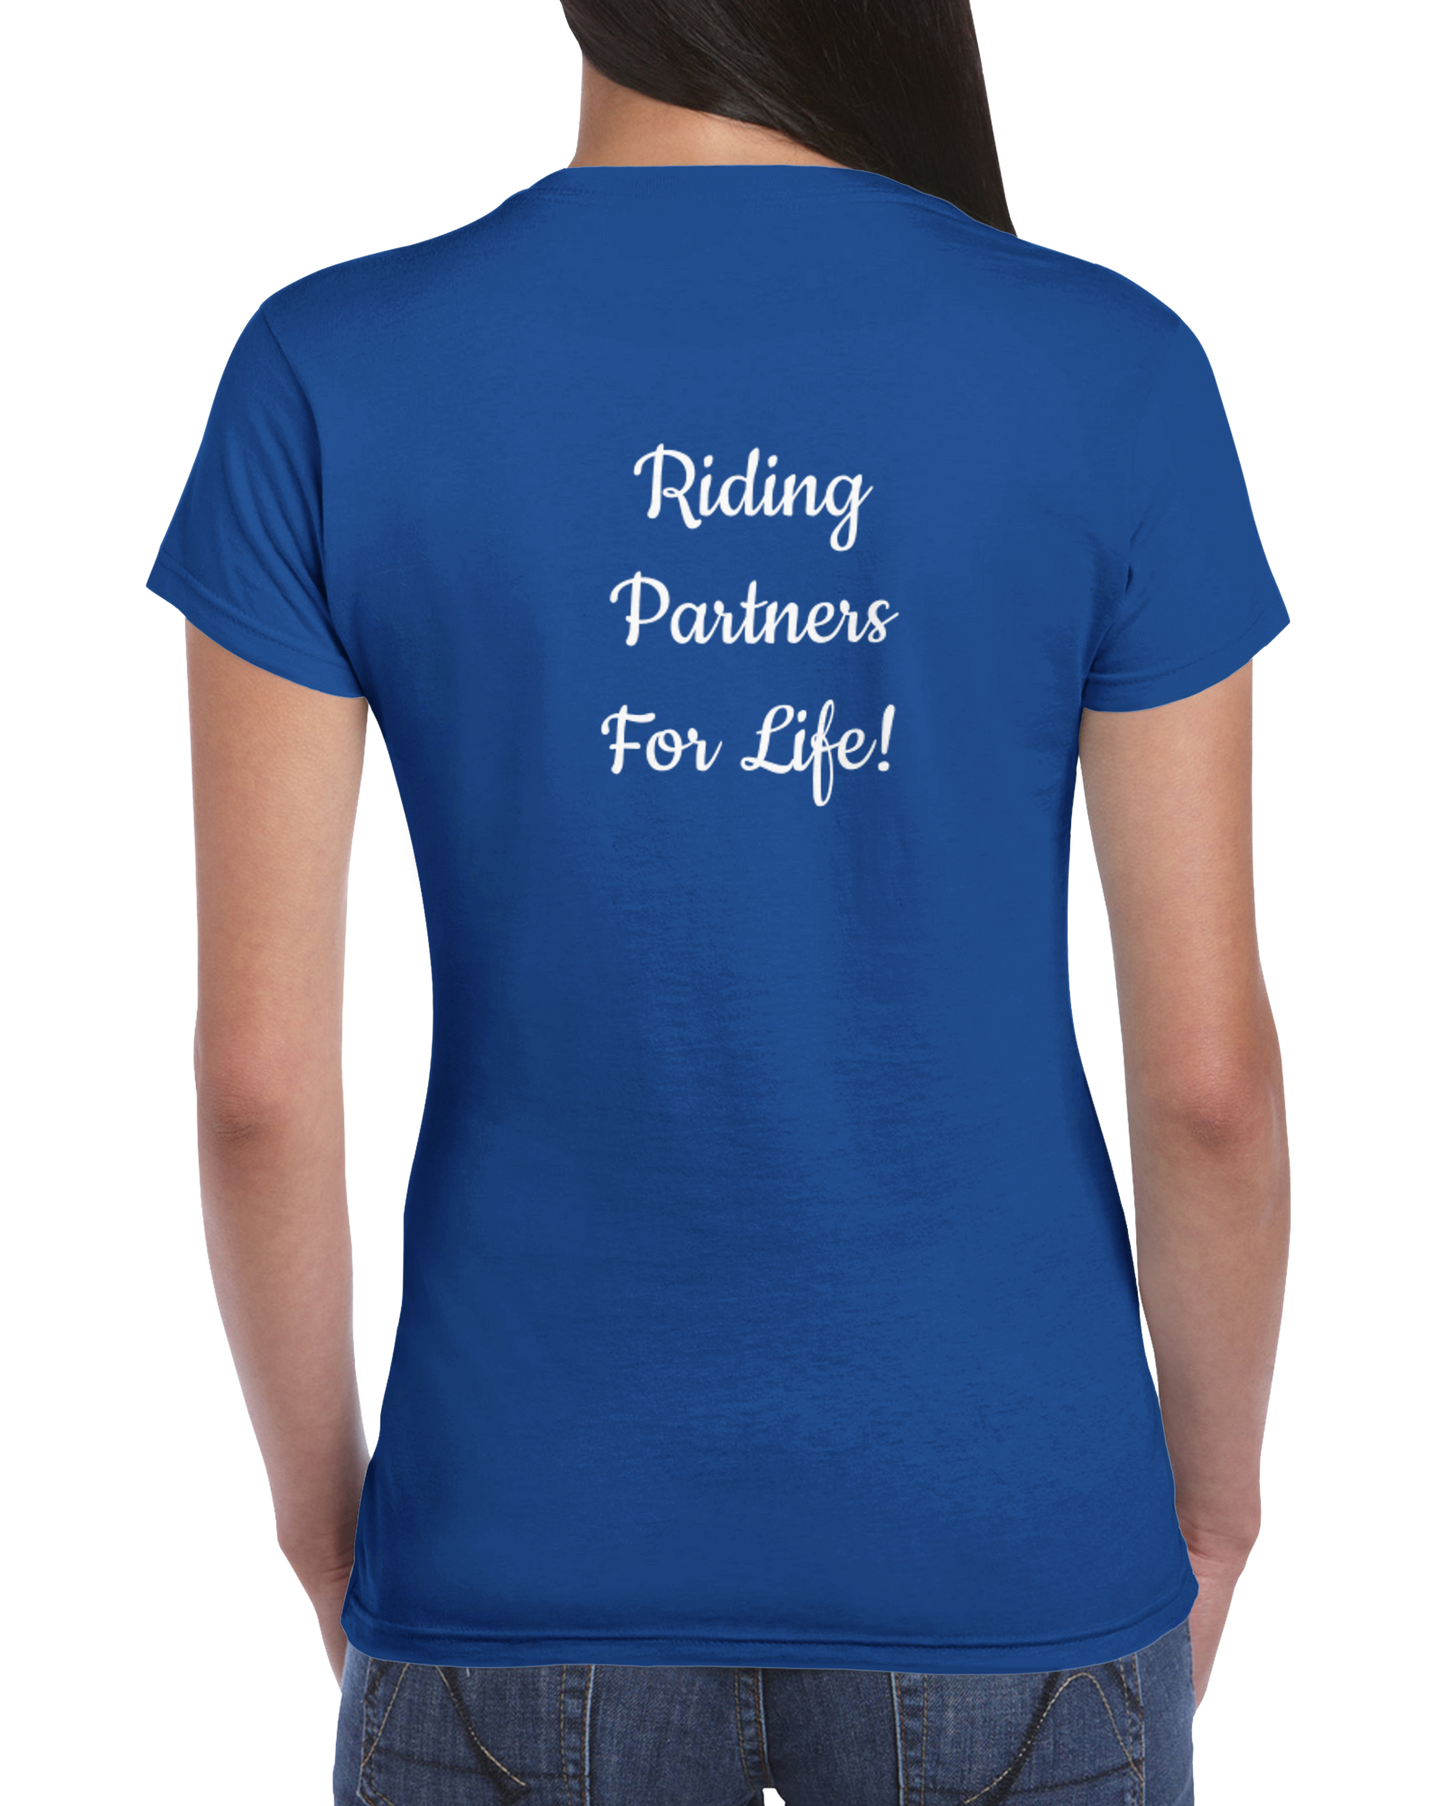 Hand Drawn Horse || Womens Crewneck T-shirt - Oil Painting - Personalized; Personalized with your horse